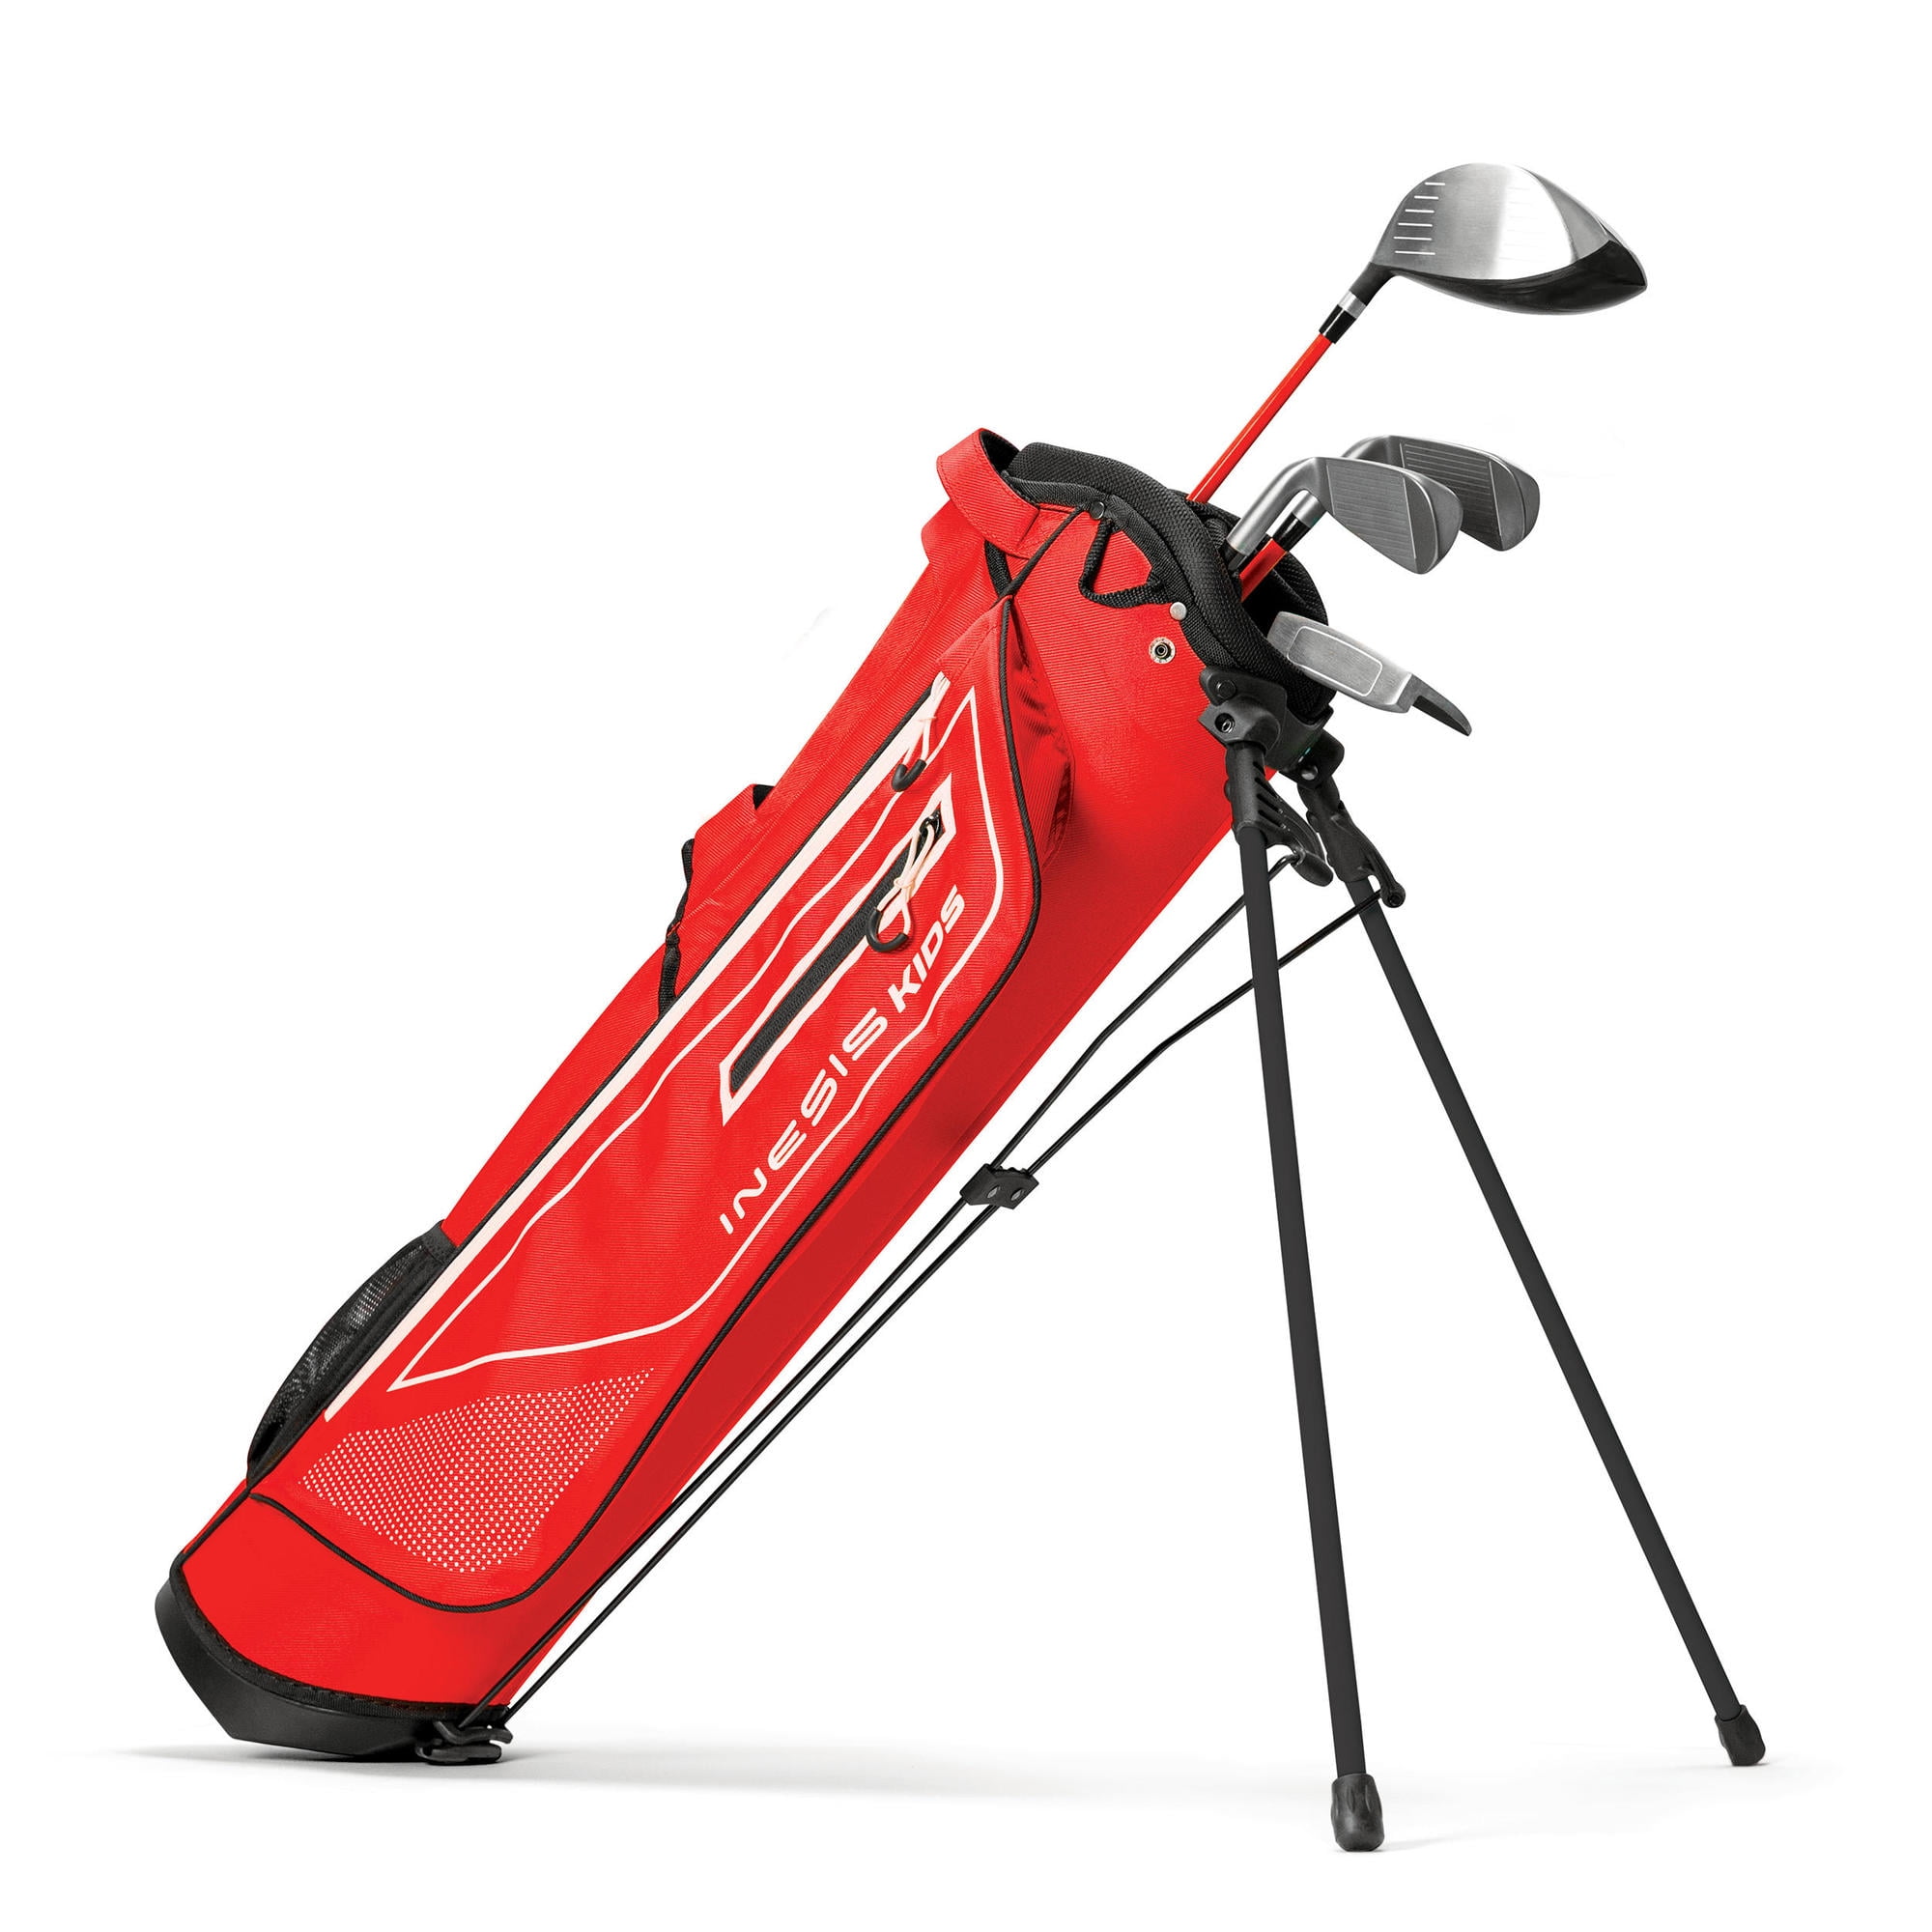 Decathlon Inesis, Right Handed, 4 Piece, Junior Golf Club Set for kids ages 8-10 Years Old